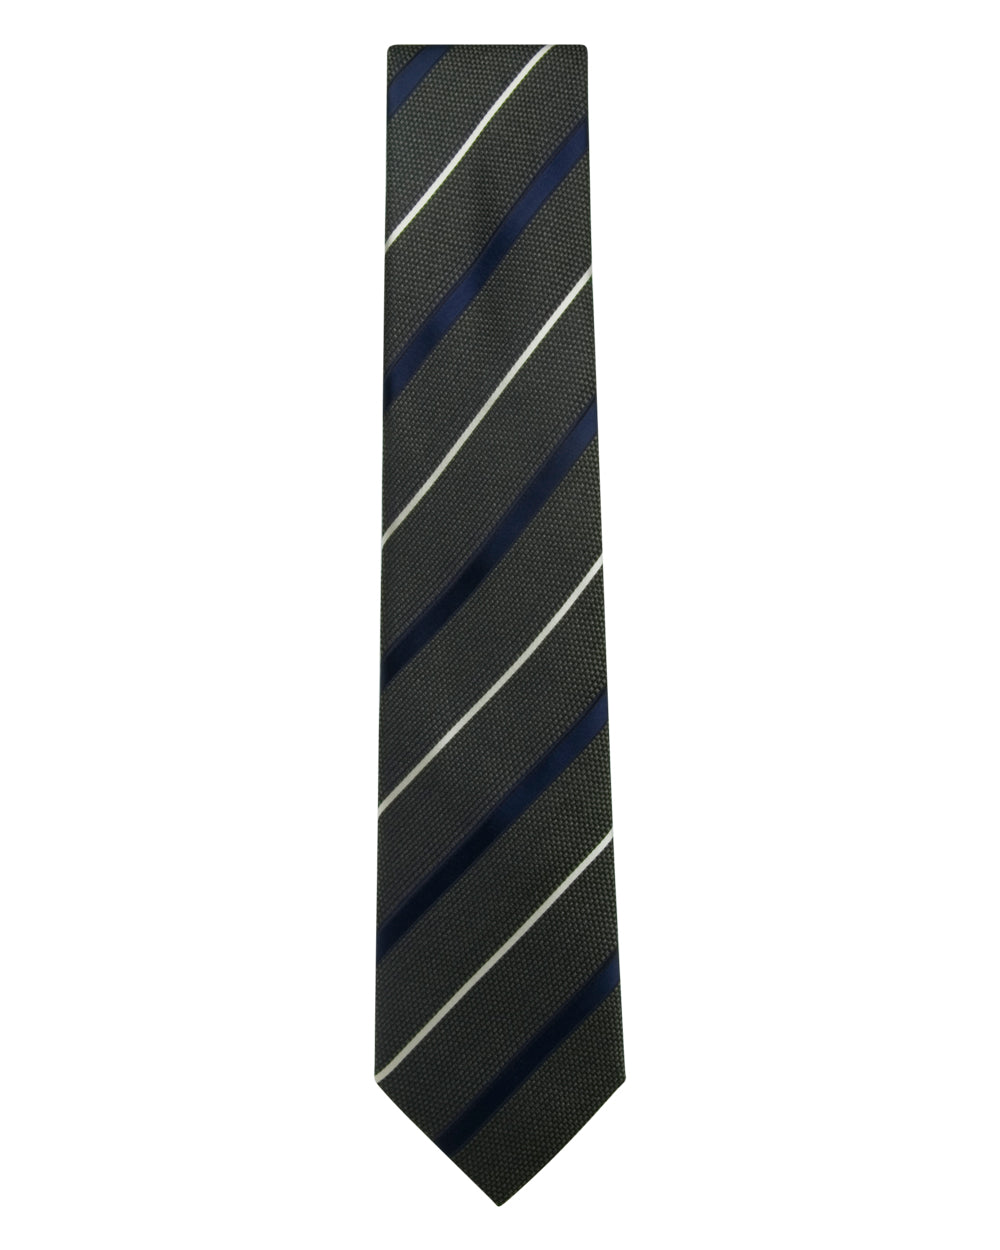 Green and Navy Stripe Tie